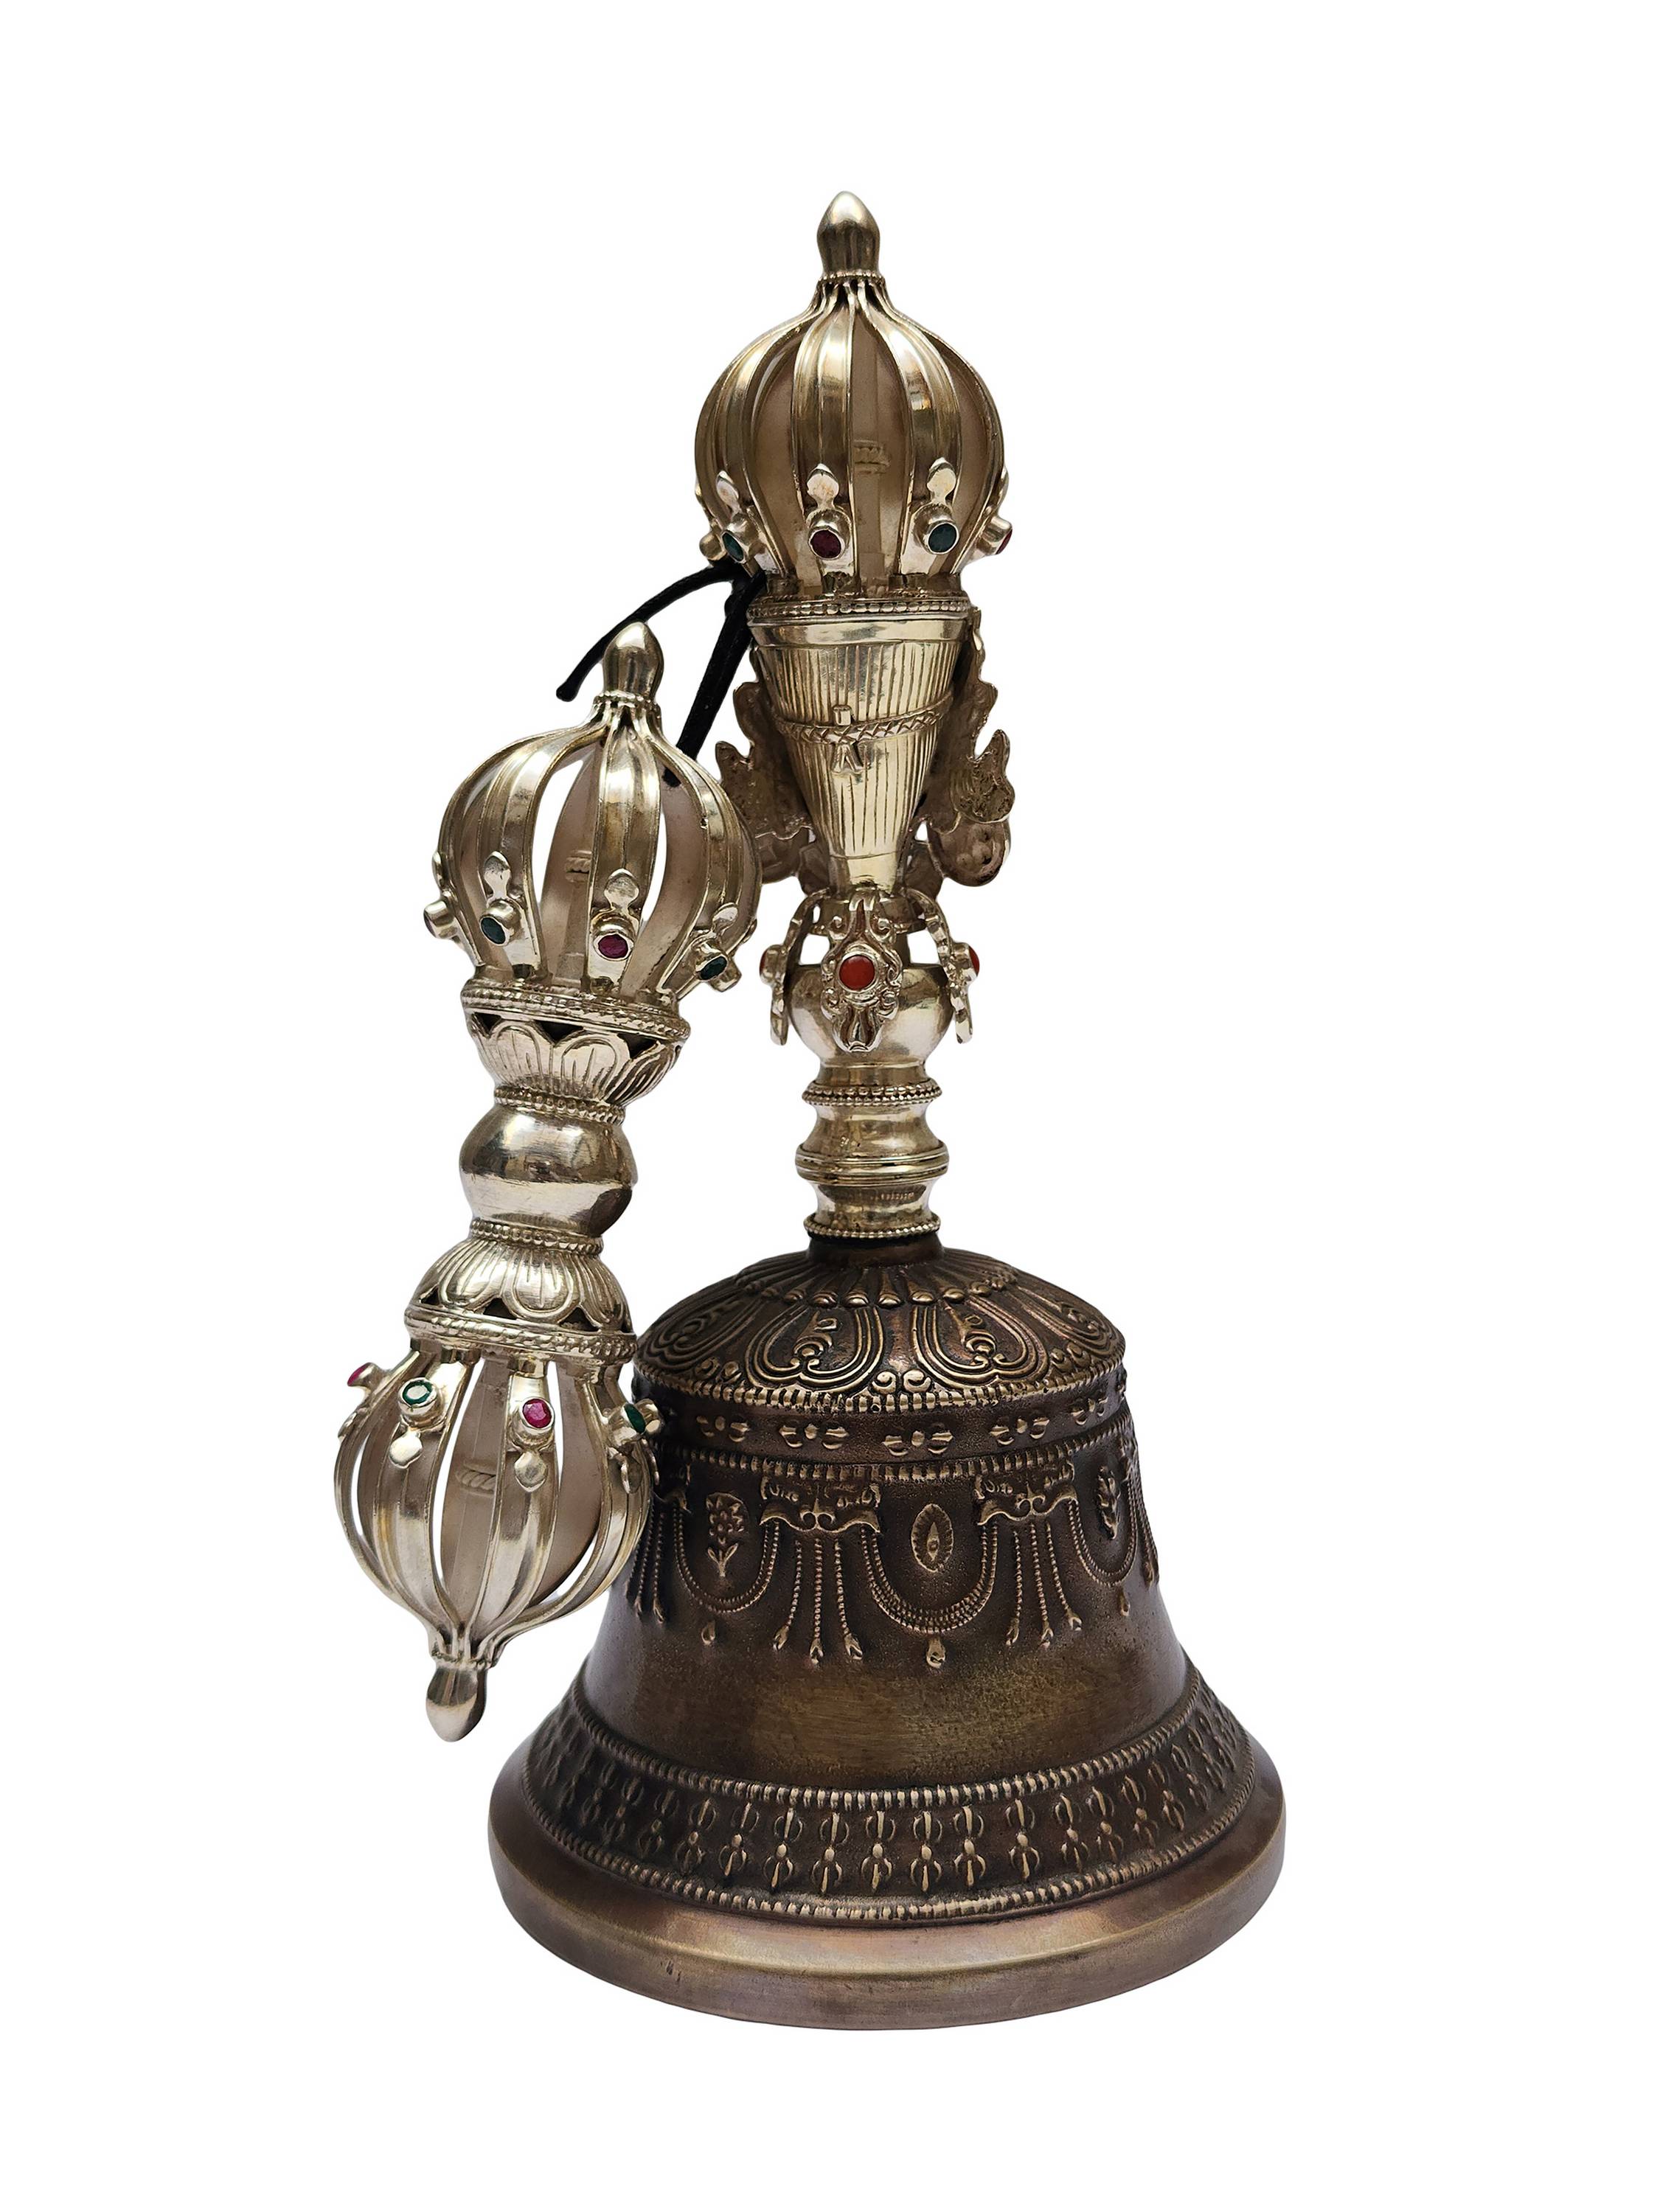 Bell And Dorje vajra, Pure Silver, high Quality, Antique Finishing, silver